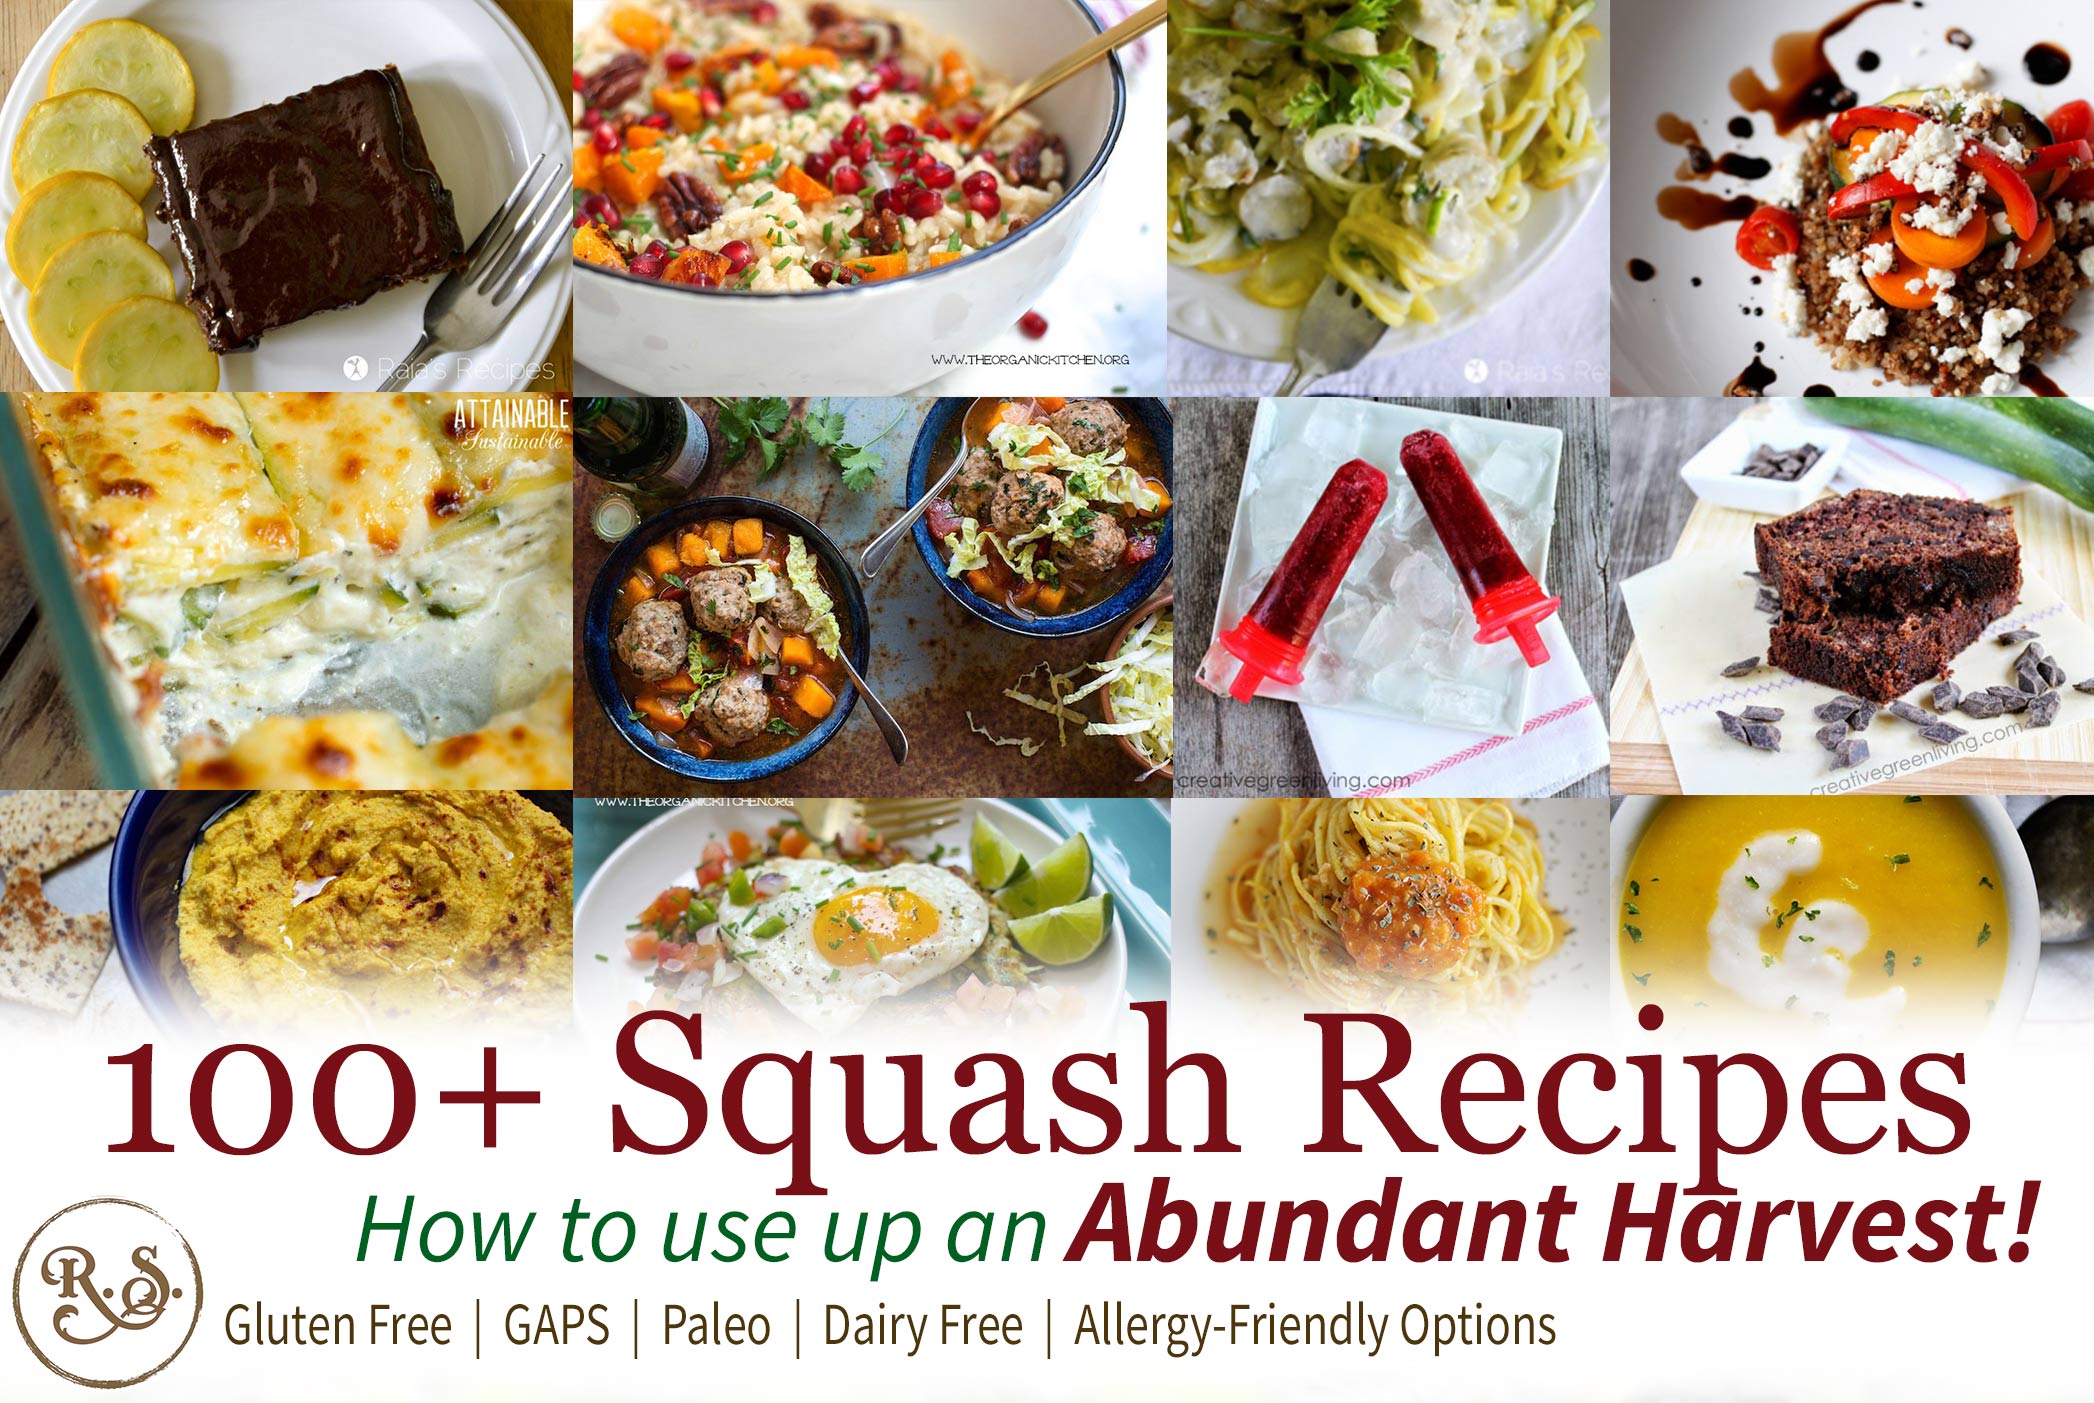 Find 100+ squash recipes to use up an abundant squash harvest from your garden. When squash is in season you can’t have too many recipes. Find the right easy squash recipe for you.